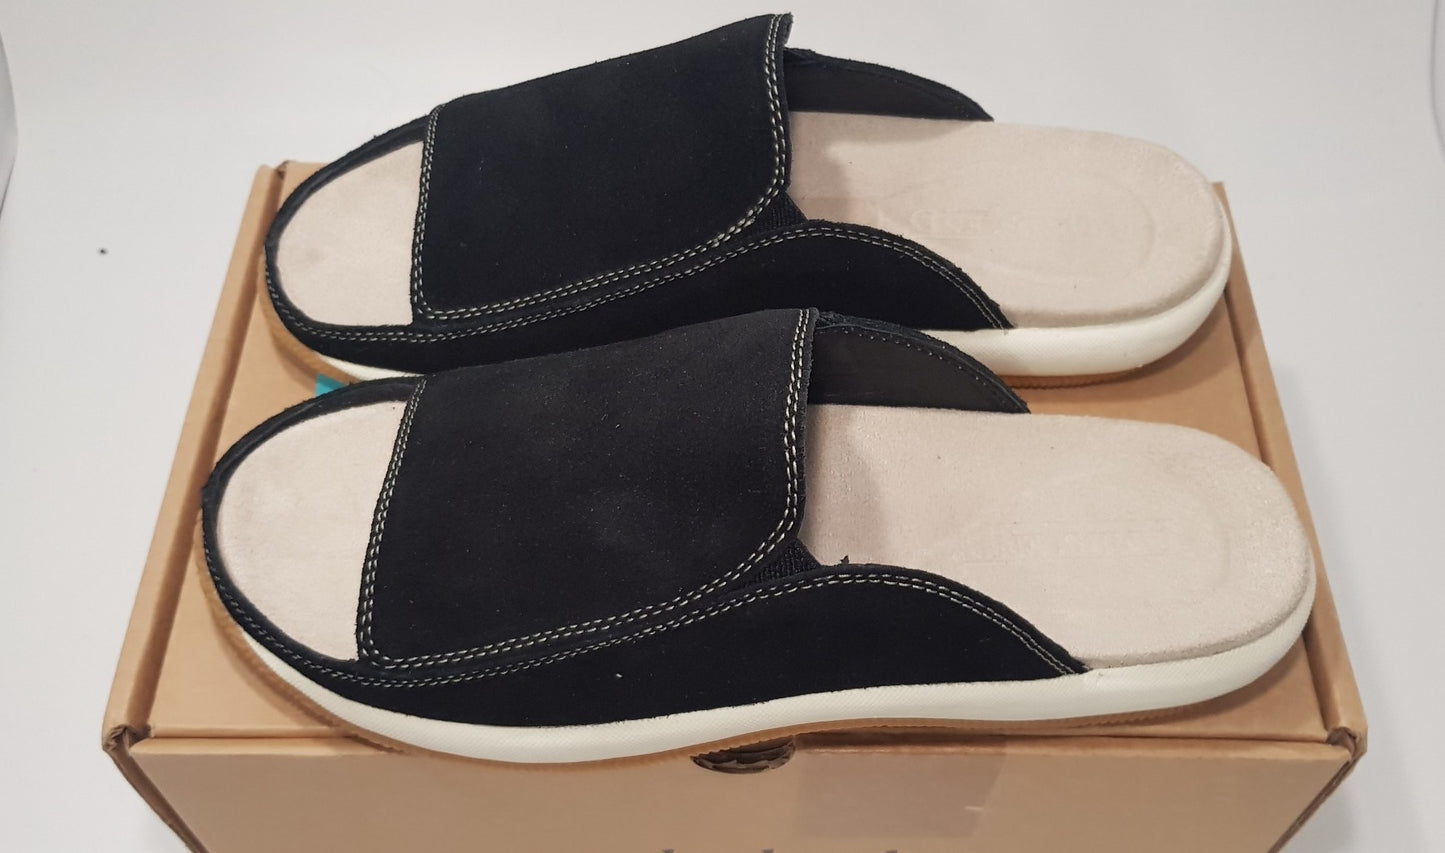 Lands'End Black Suede Sliders Size 8.5B (SKU1434305) Nearly New in Box